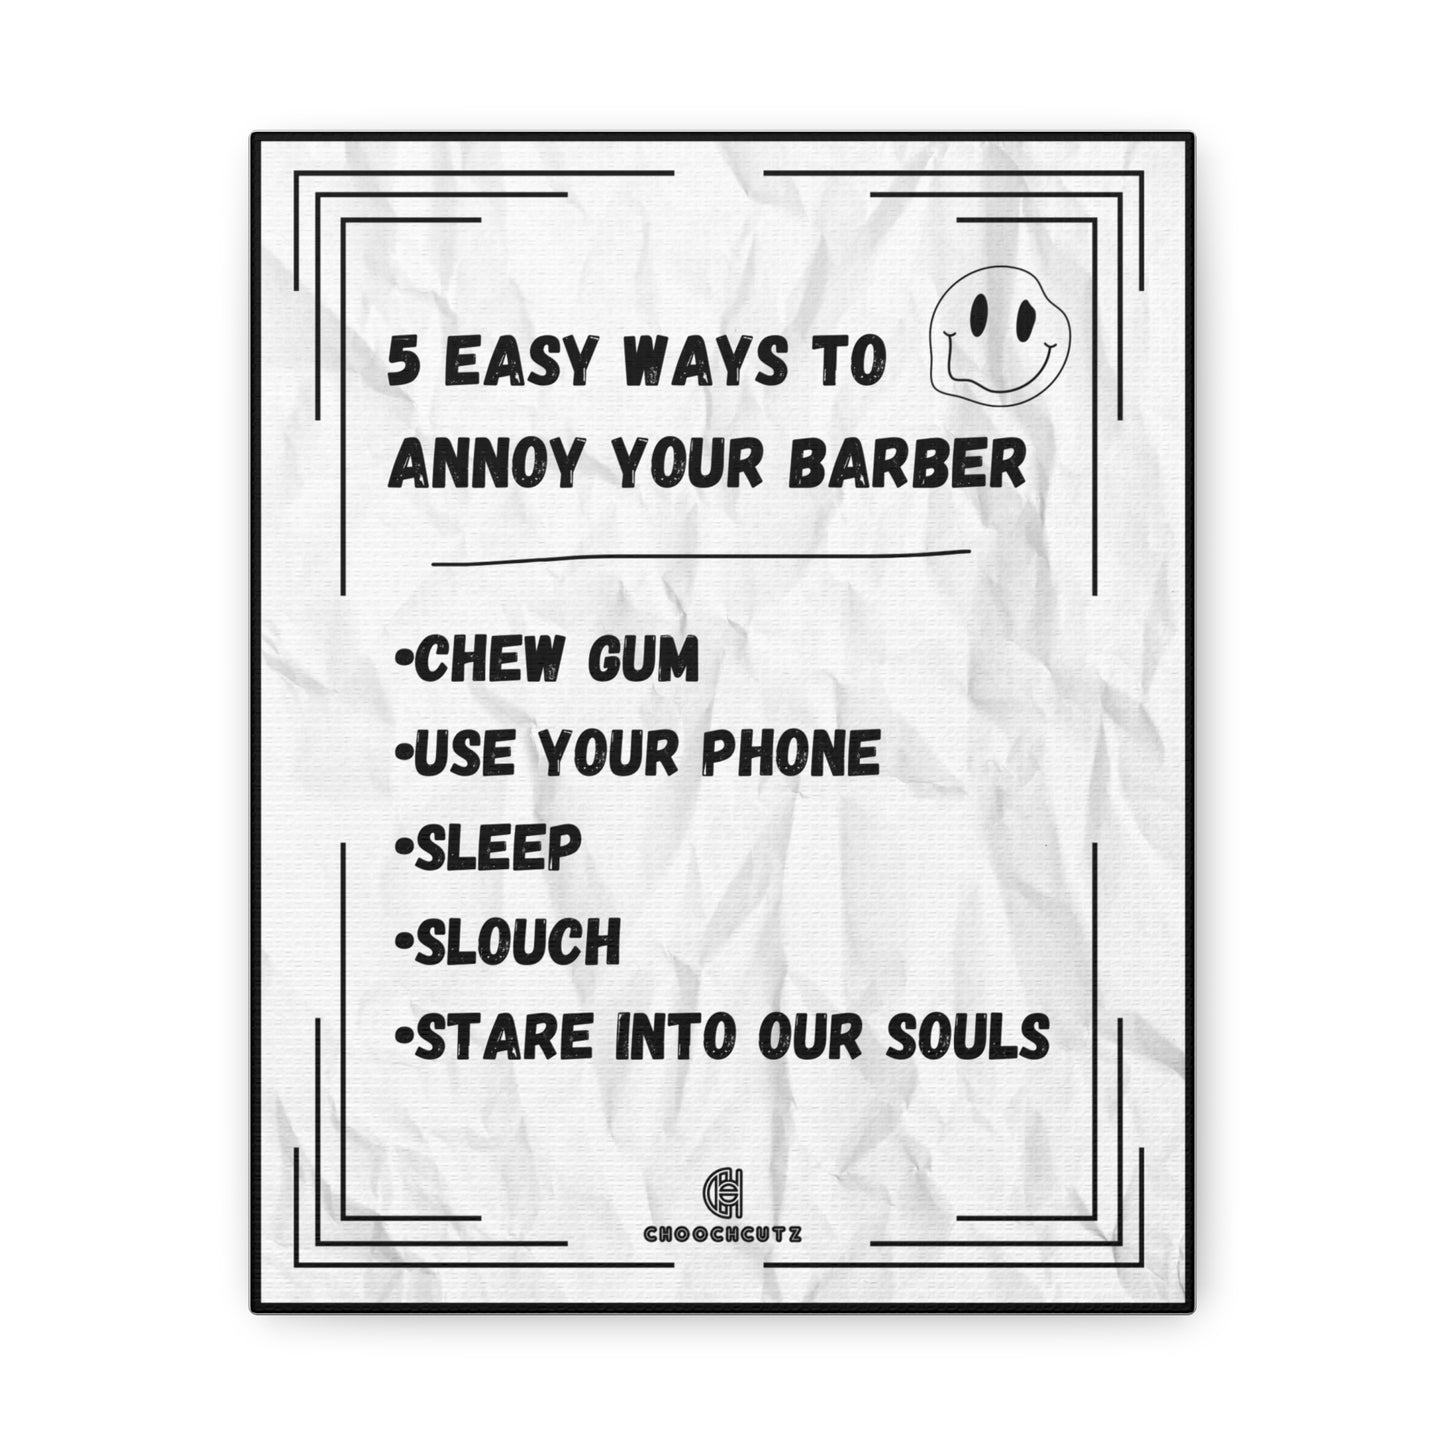 Barber Jokes Canvas for Barbershop Decor "5 easy ways to annoy your barber"